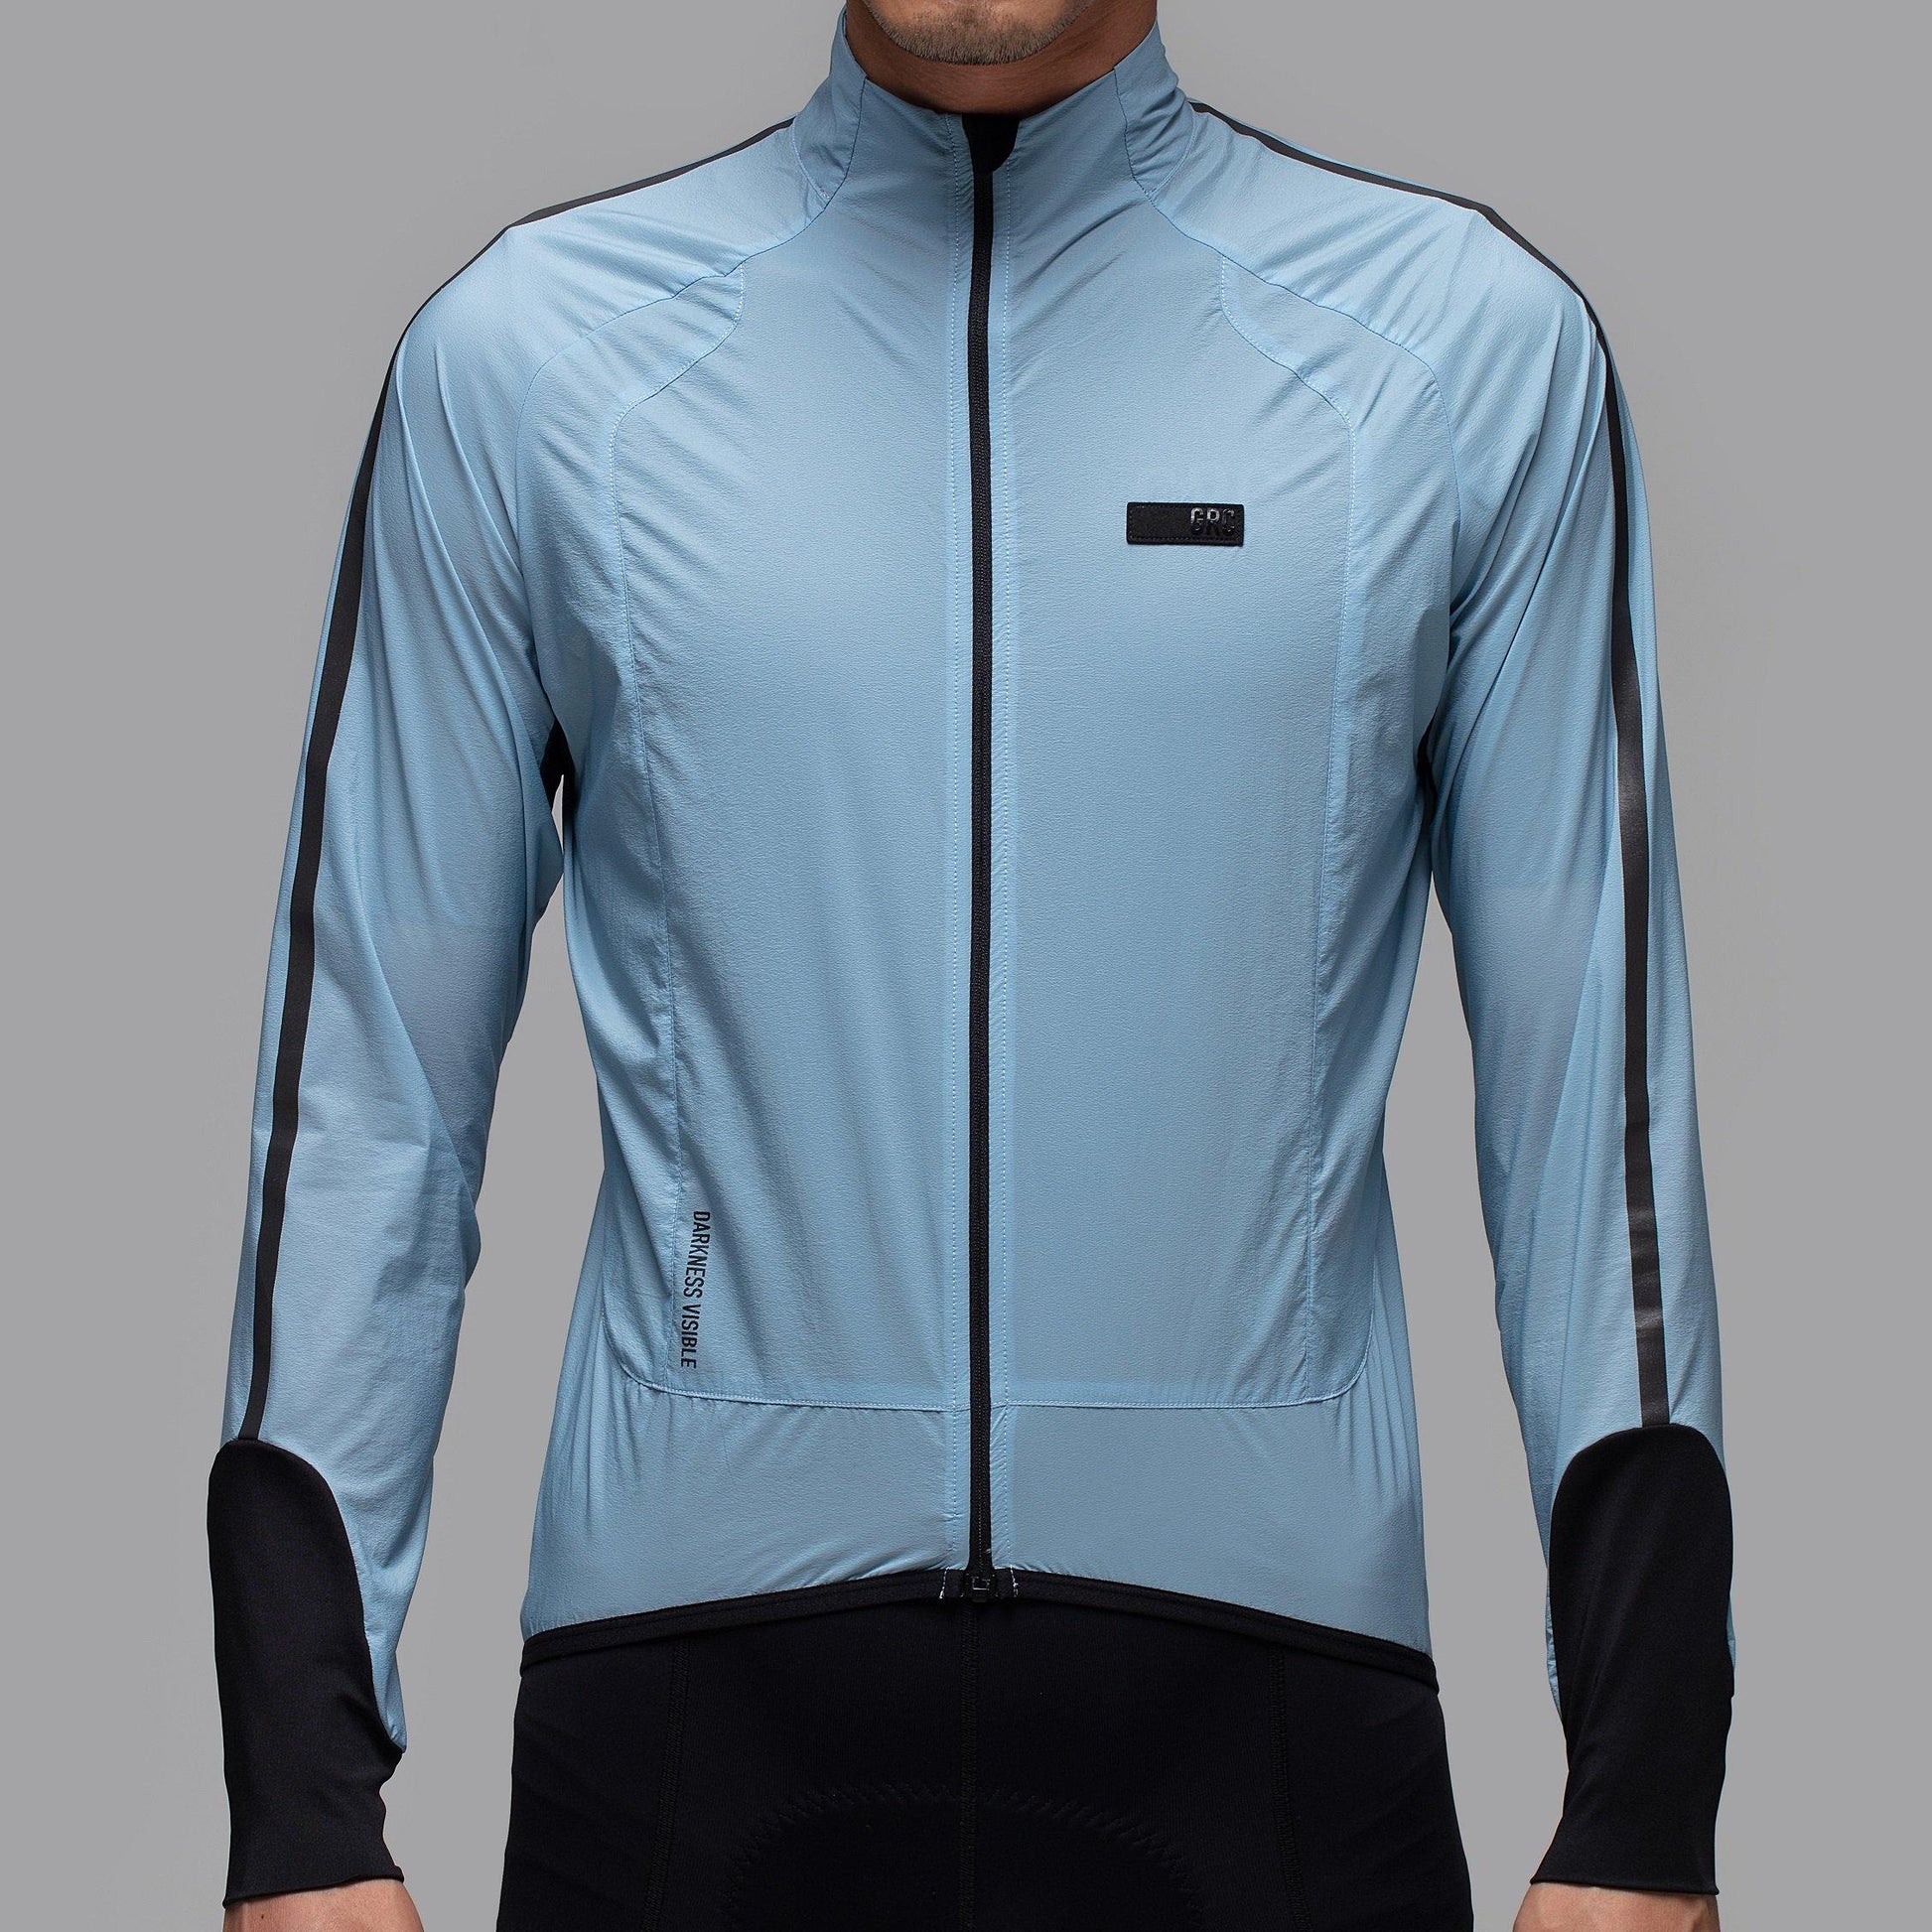 All Conditional Wind Jacket - GRC Cycling Apparel